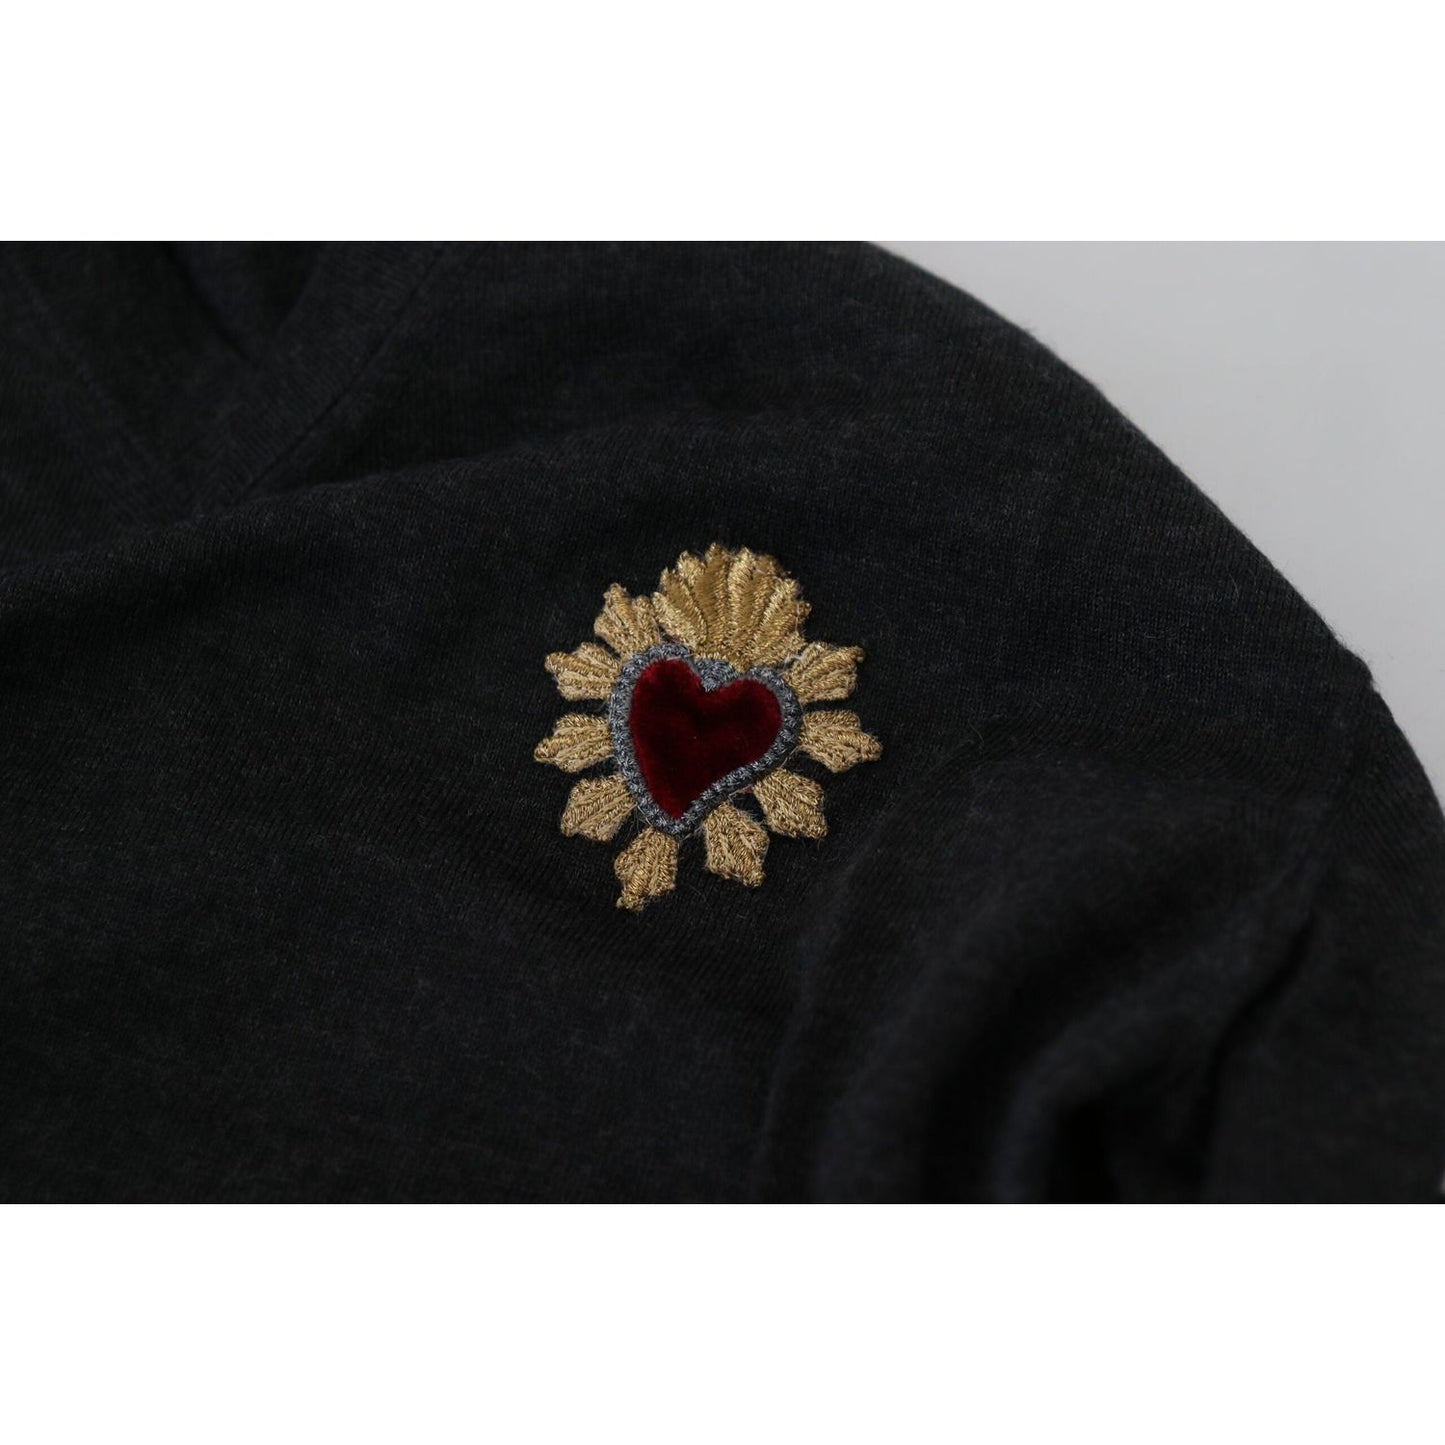 Dolce & Gabbana V-Neck Cashmere Sweater with Heart Embroidery gray-cashmere-v-neck-gold-heart-sweater